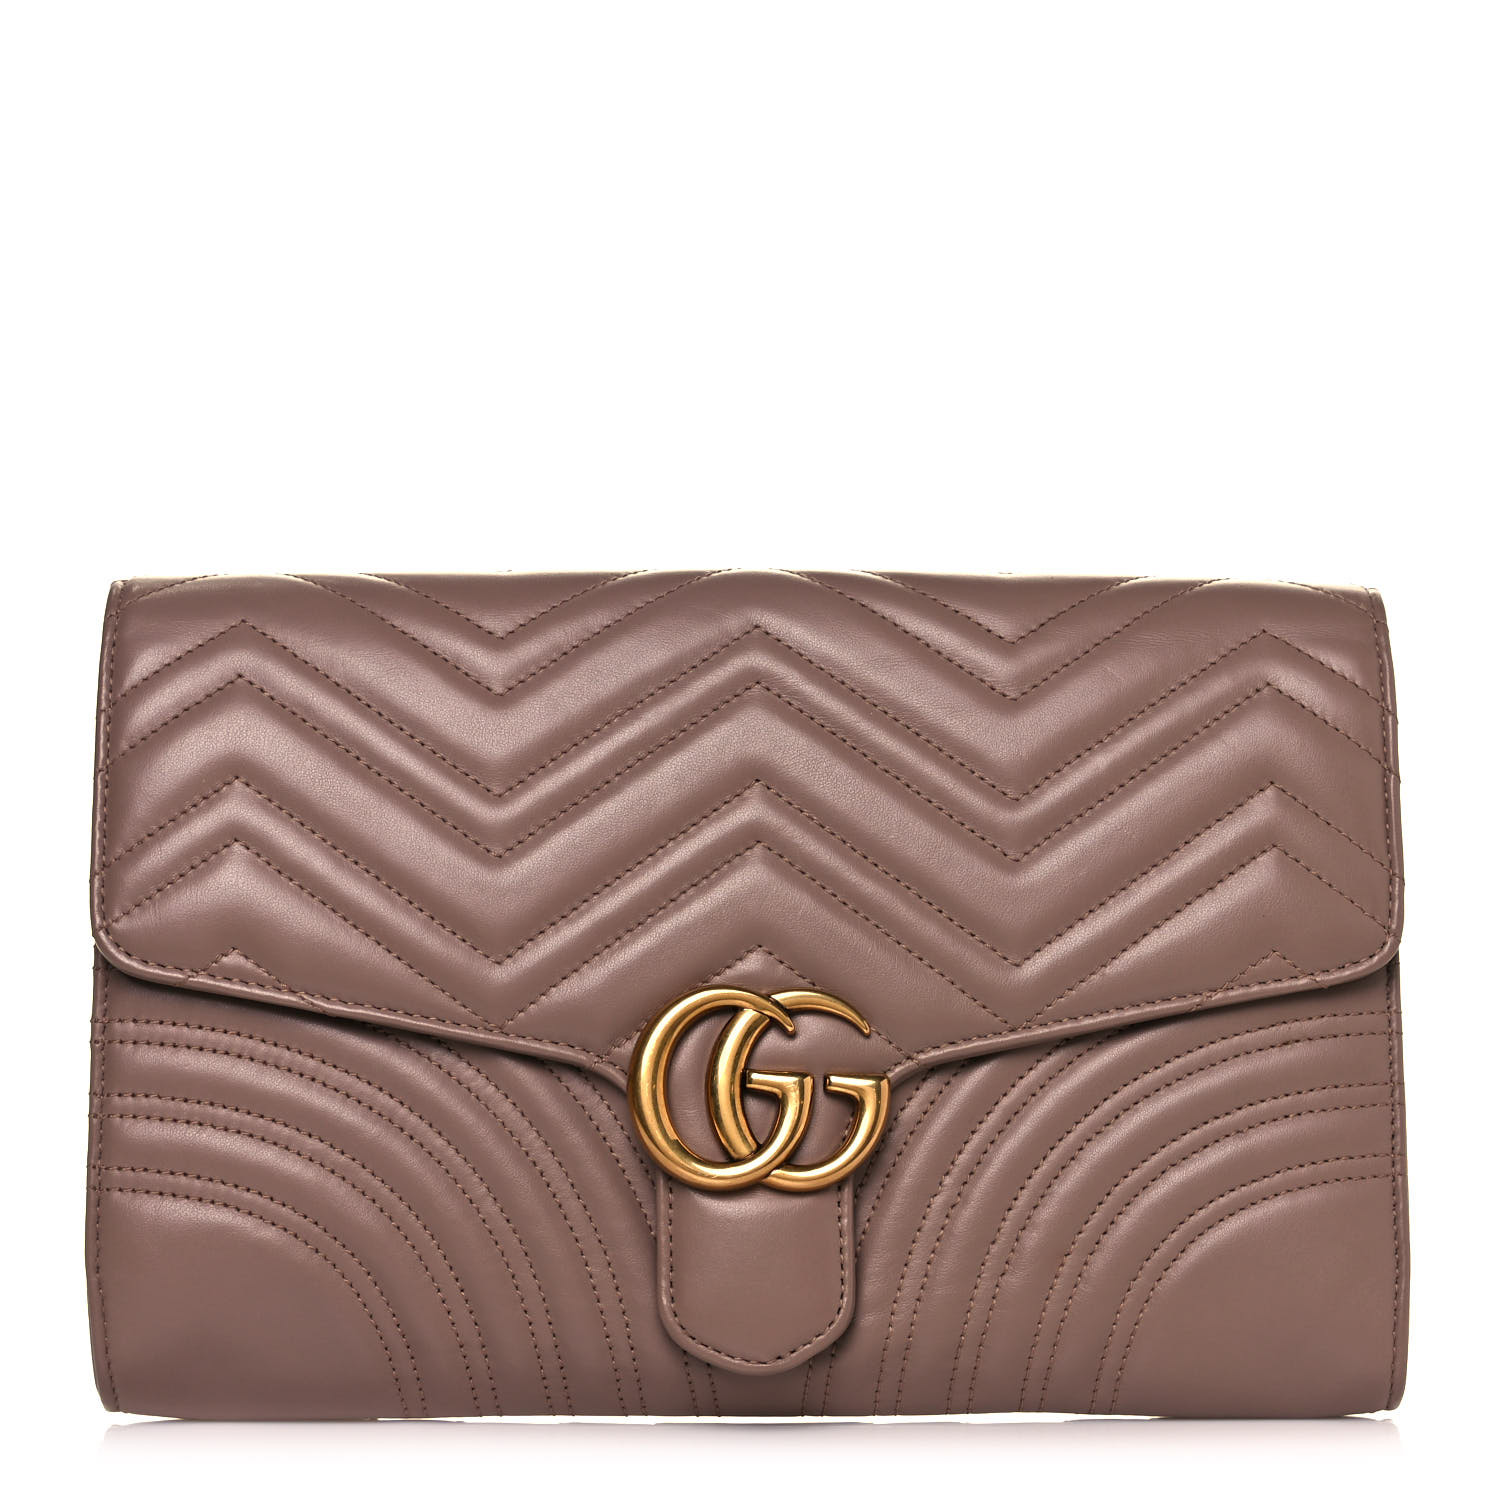 GUCCI Matelasse GG Marmont Clutch Old Rose 880335 | FASHIONPHILE